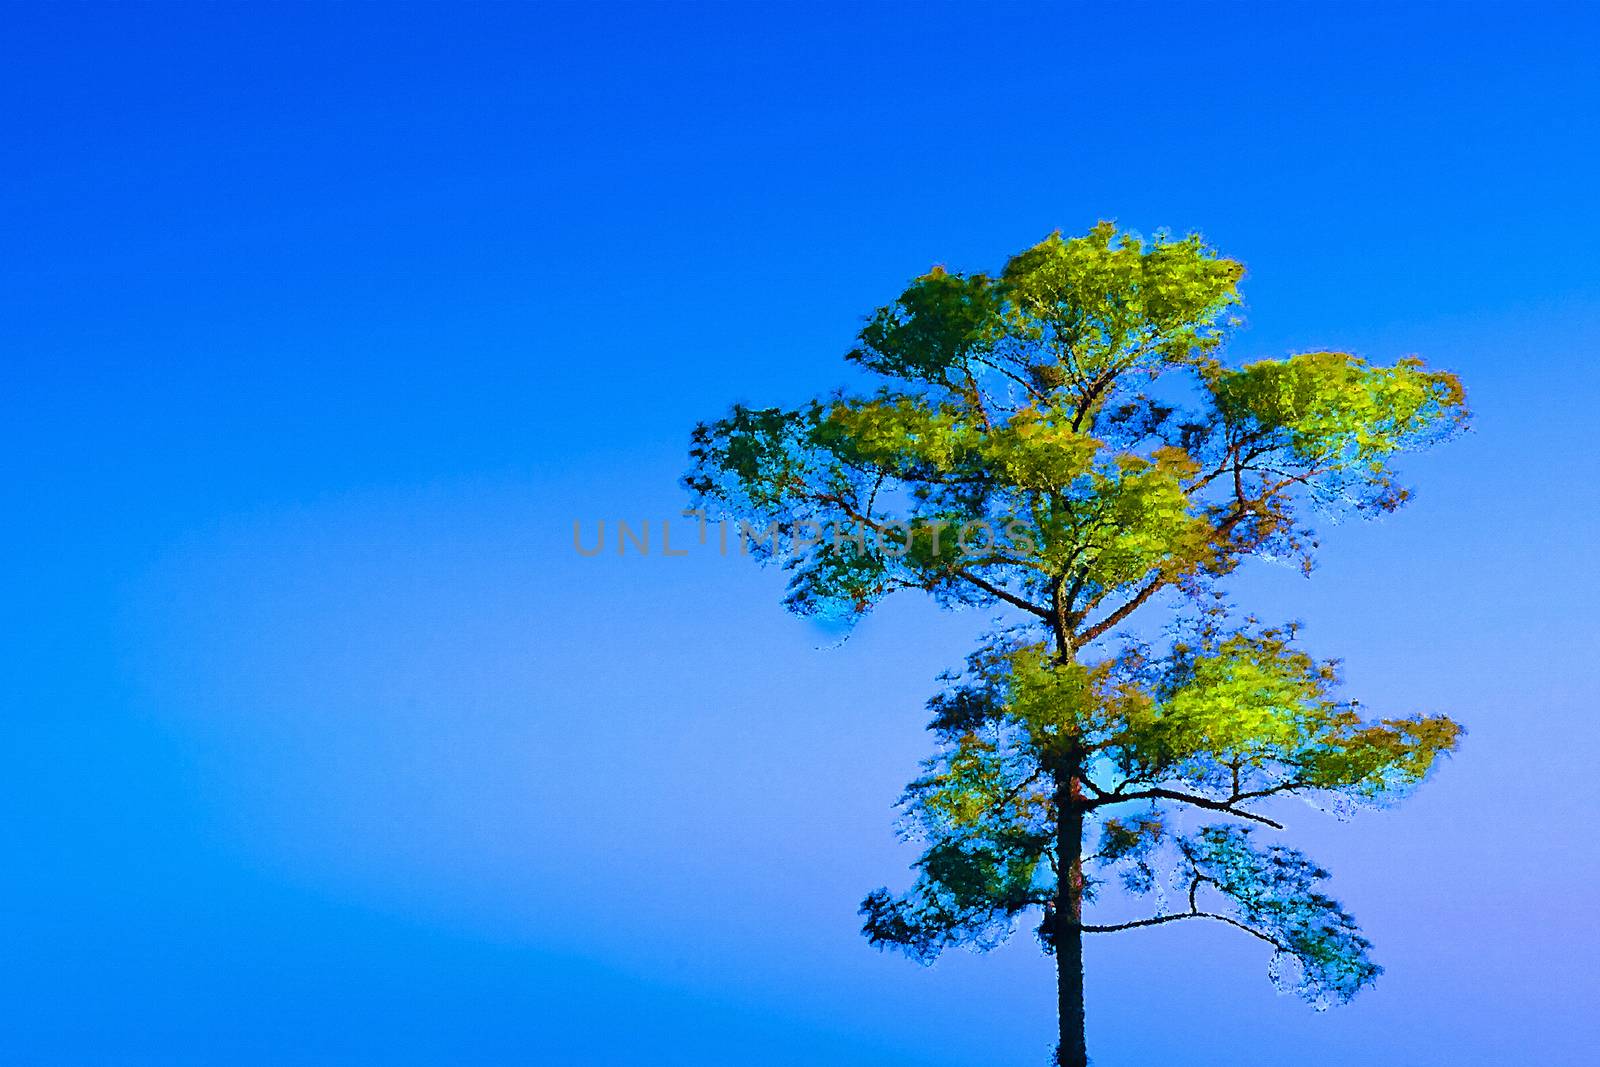 The Lonely Tree with Blue Sky - Oil Painting from Photo.